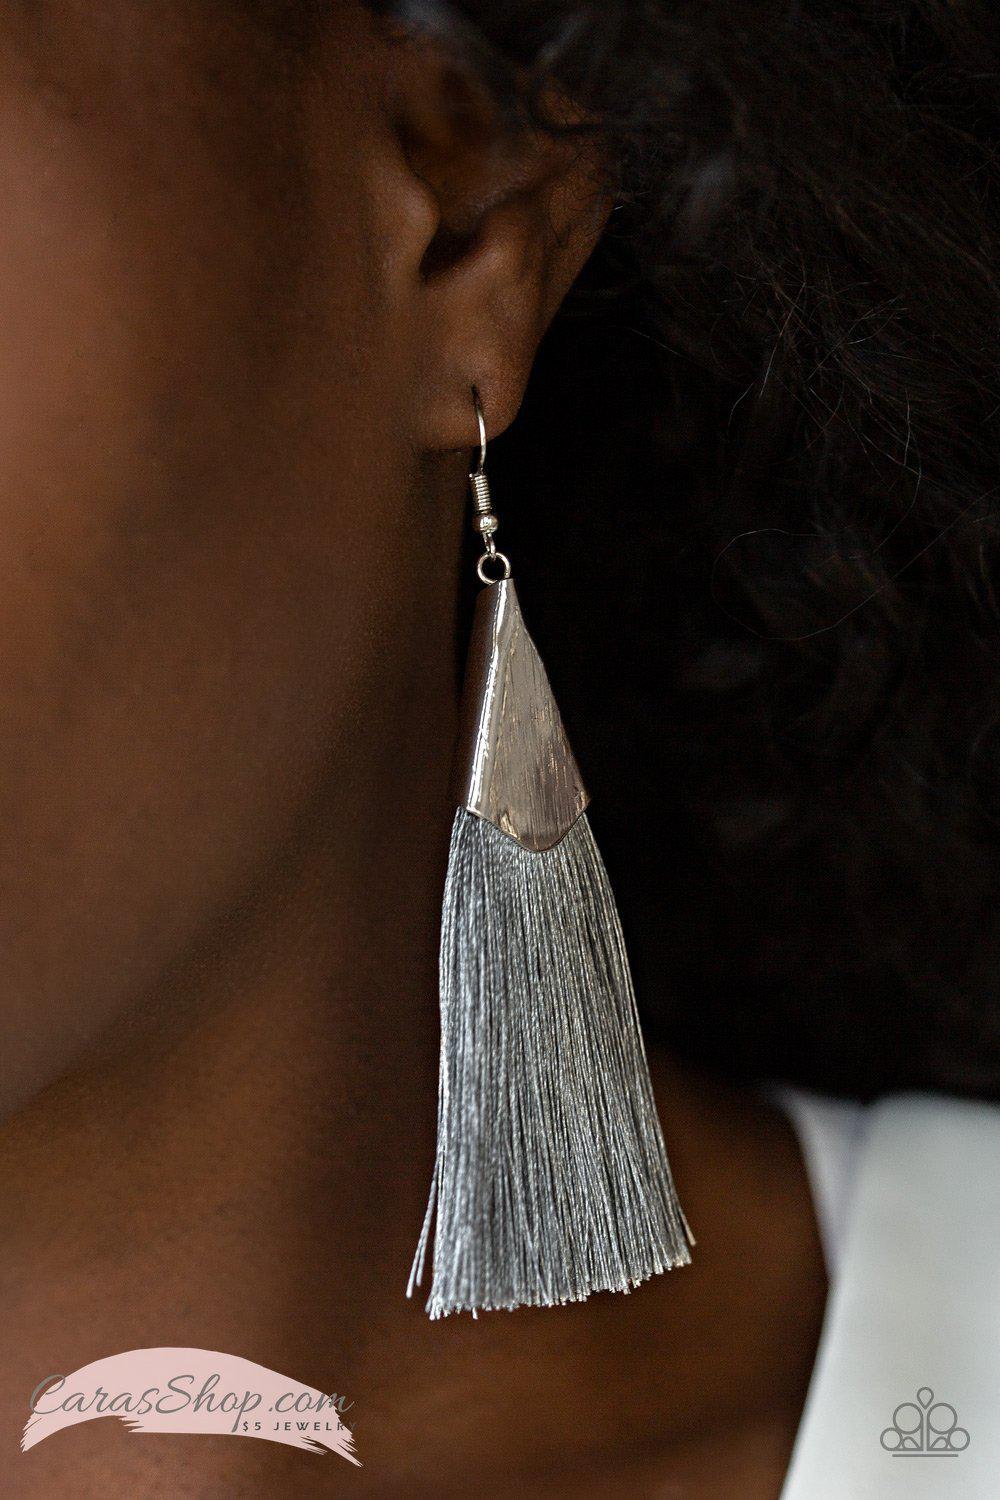 In Full PLUME Silver Tassel Earrings - Paparazzi Accessories-CarasShop.com - $5 Jewelry by Cara Jewels